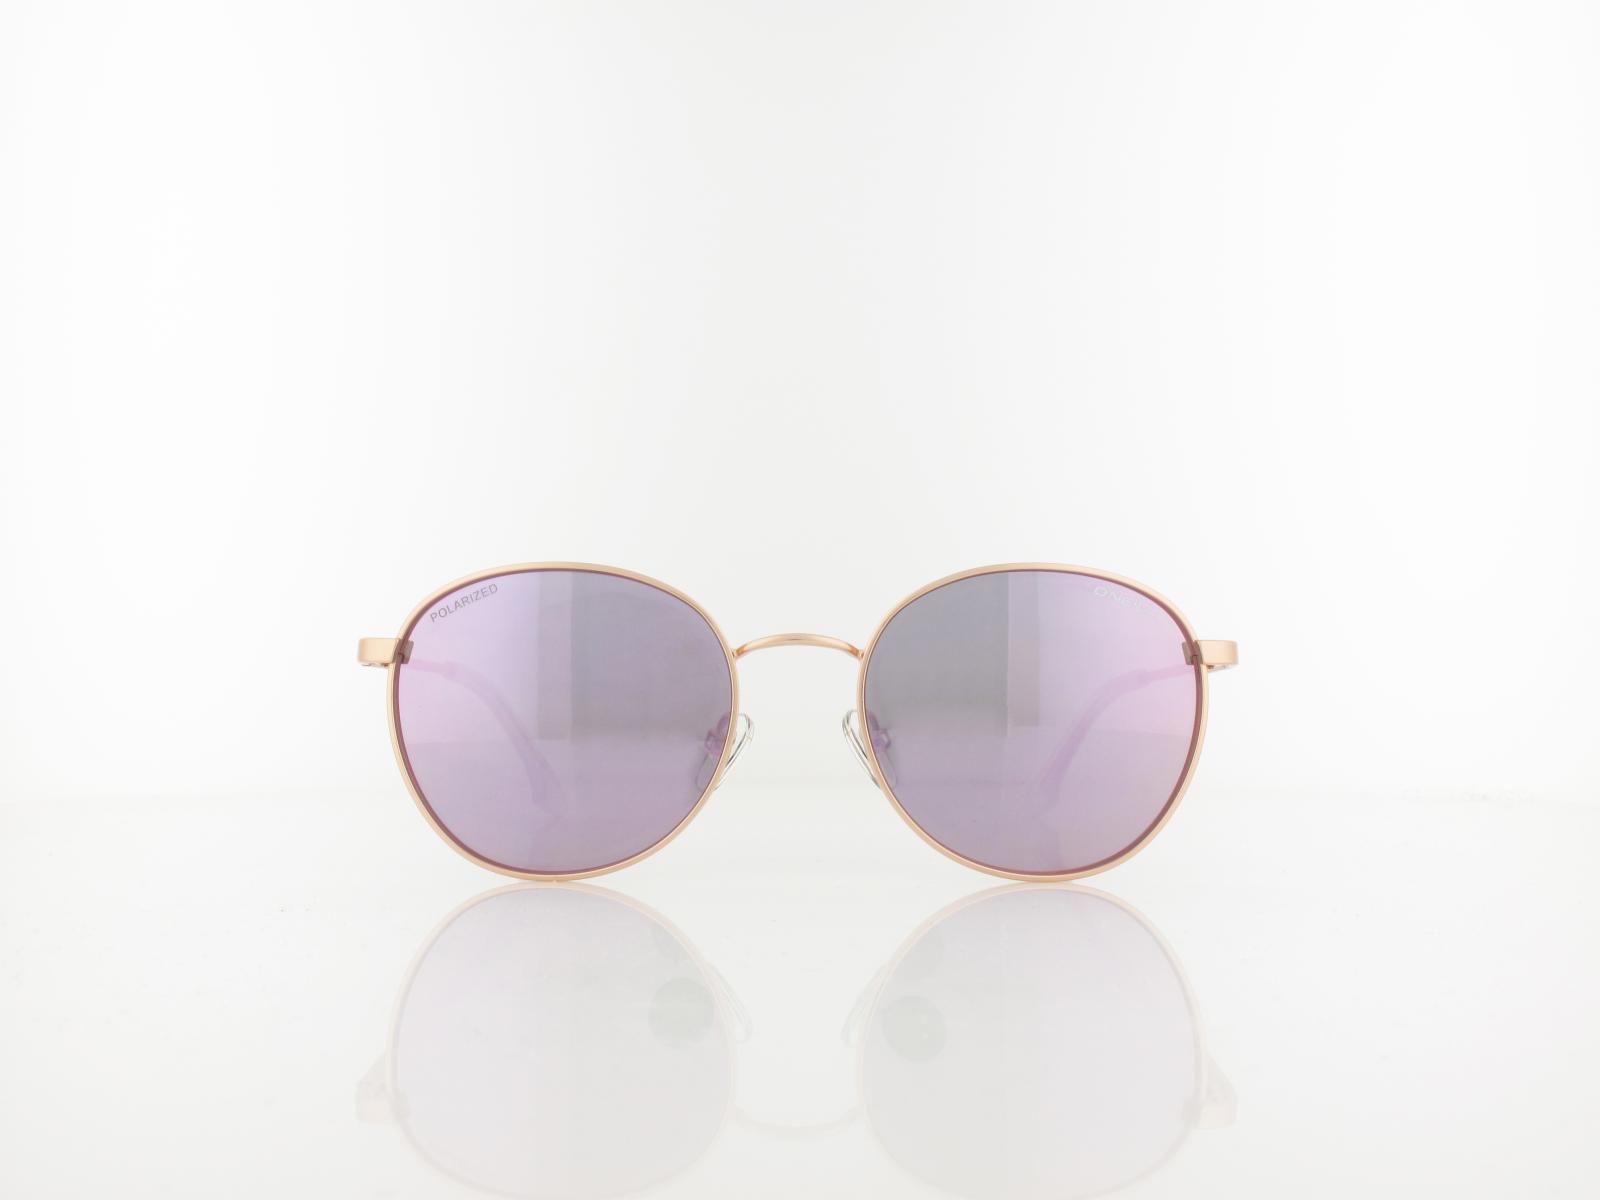 O'Neill | ONS 9013 2.0 072P 52 | satin pink rose gold / pink mirror polarized